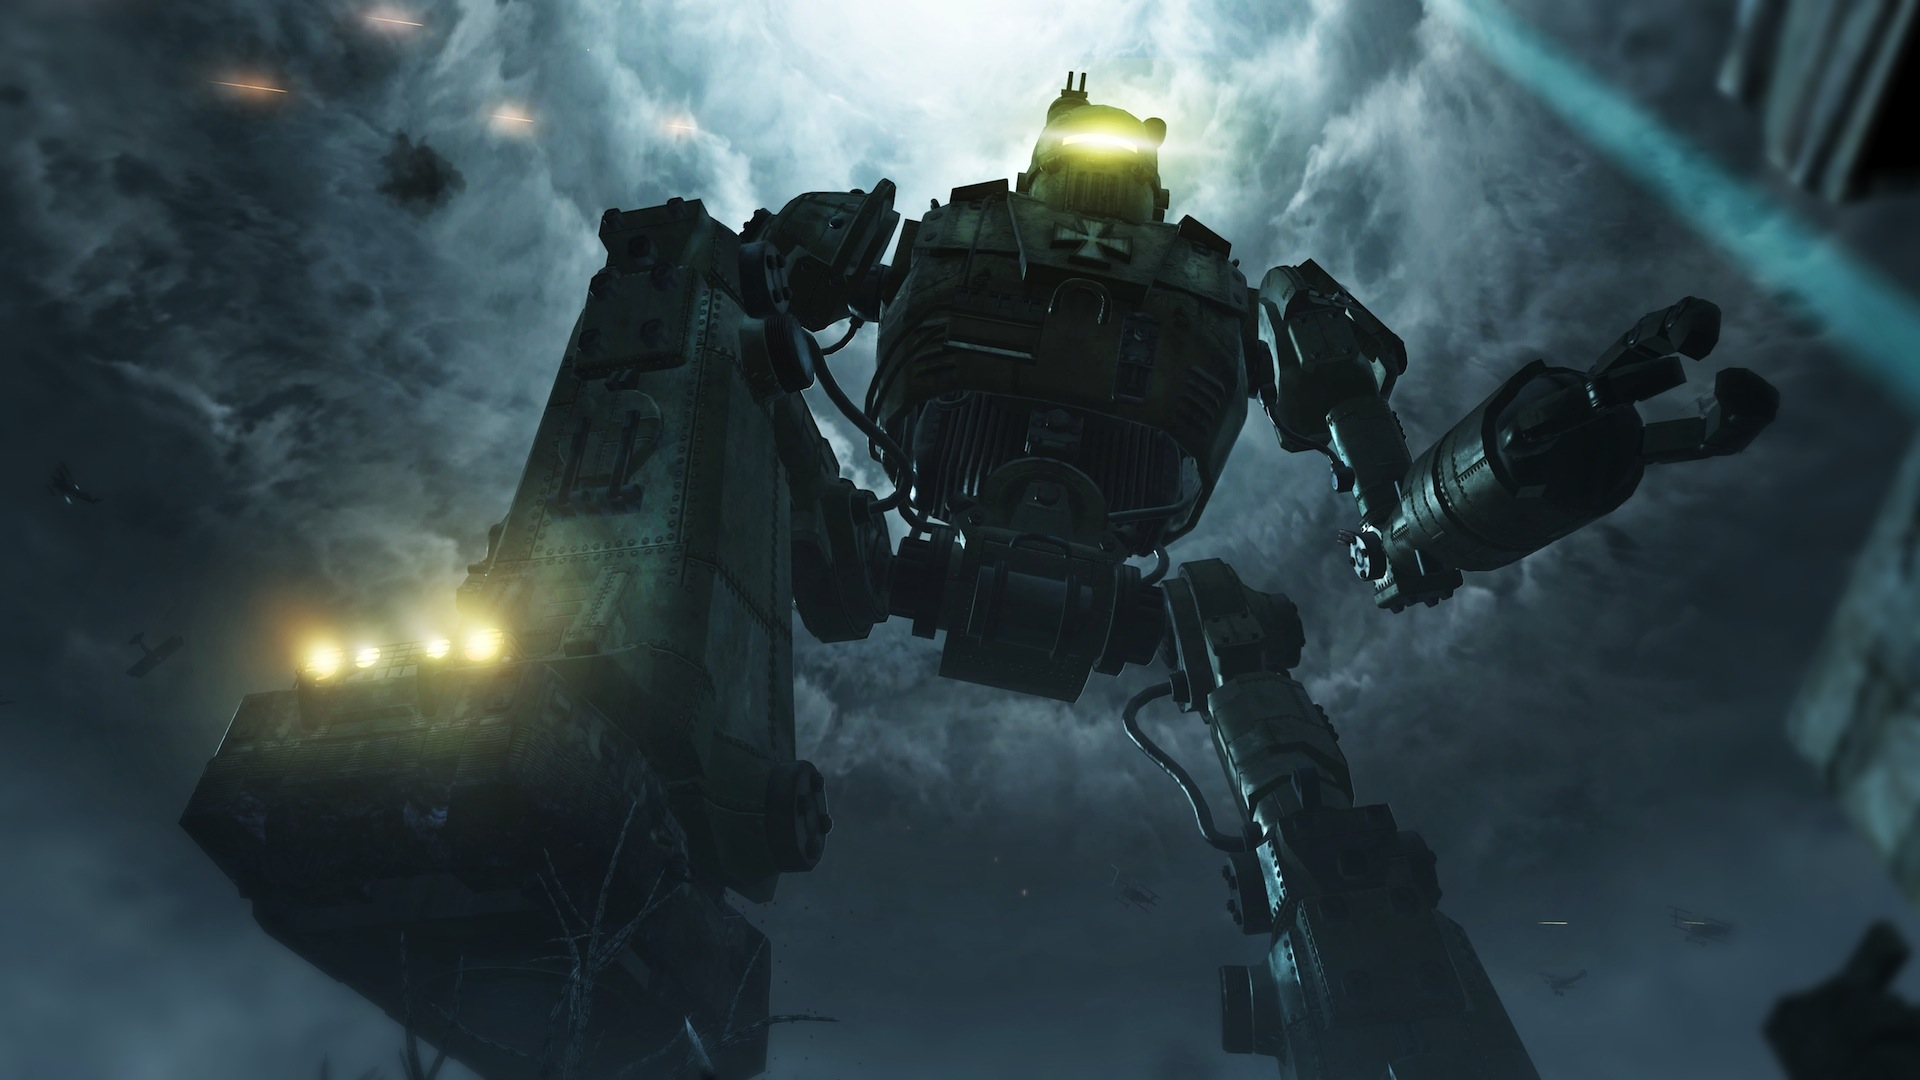 http://vignette1.wikia.nocookie.net/callofduty/images/f/fa/Giant_mech_Origins_BOII.png/revision/latest?cb=20130827204332